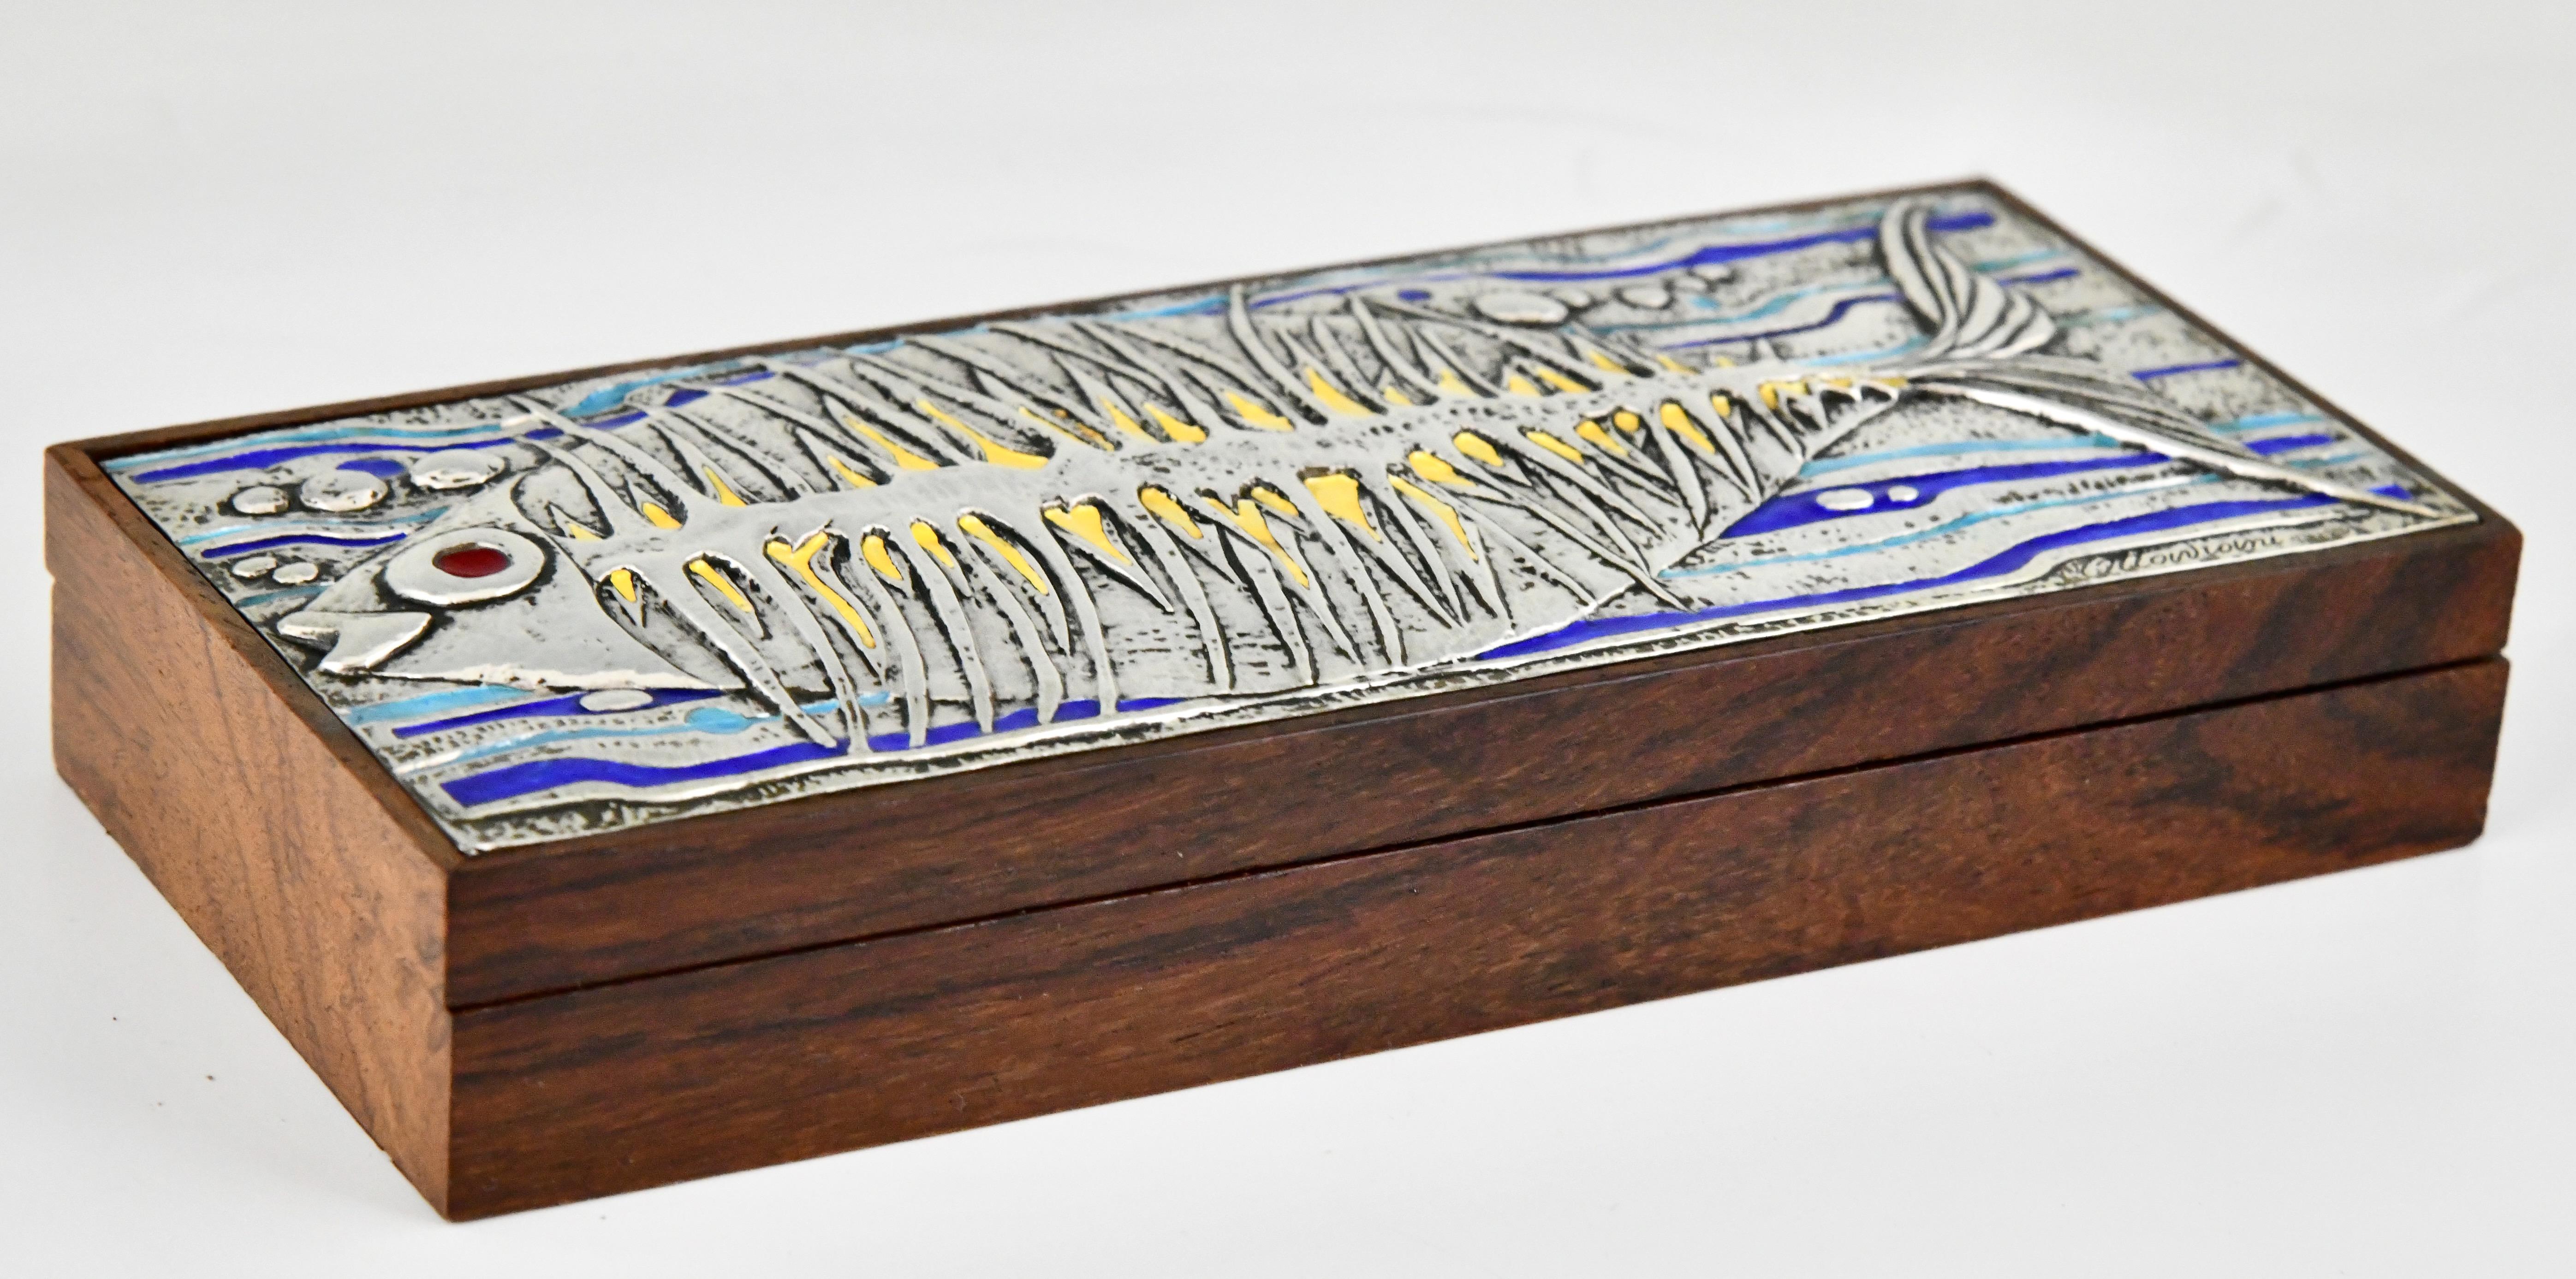 Mid Century Sterling Silver and enamel box with fish signed by Ottaviani.
Marked, Italy, Ca. 1960.
Blue, yellow and turquoise enamel.
Ottaviani (1945) is a jewelry and silver firm located in the small seaside town of Recanati, Italy. They had a